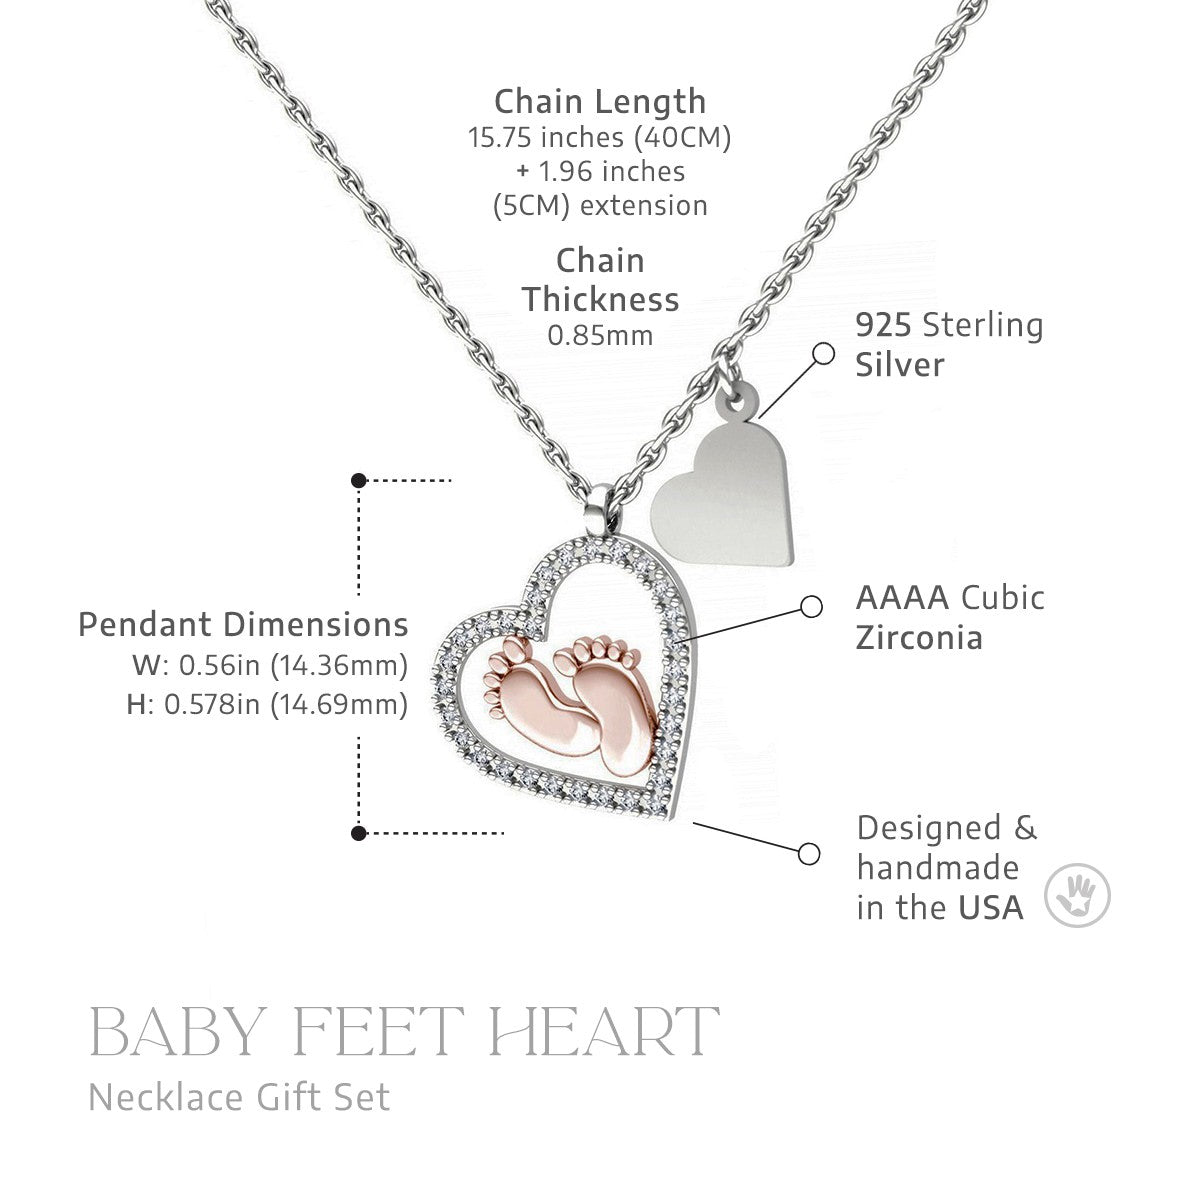 To My Mommy, Finally in your Arms - Baby Feet Necklace Gift Set